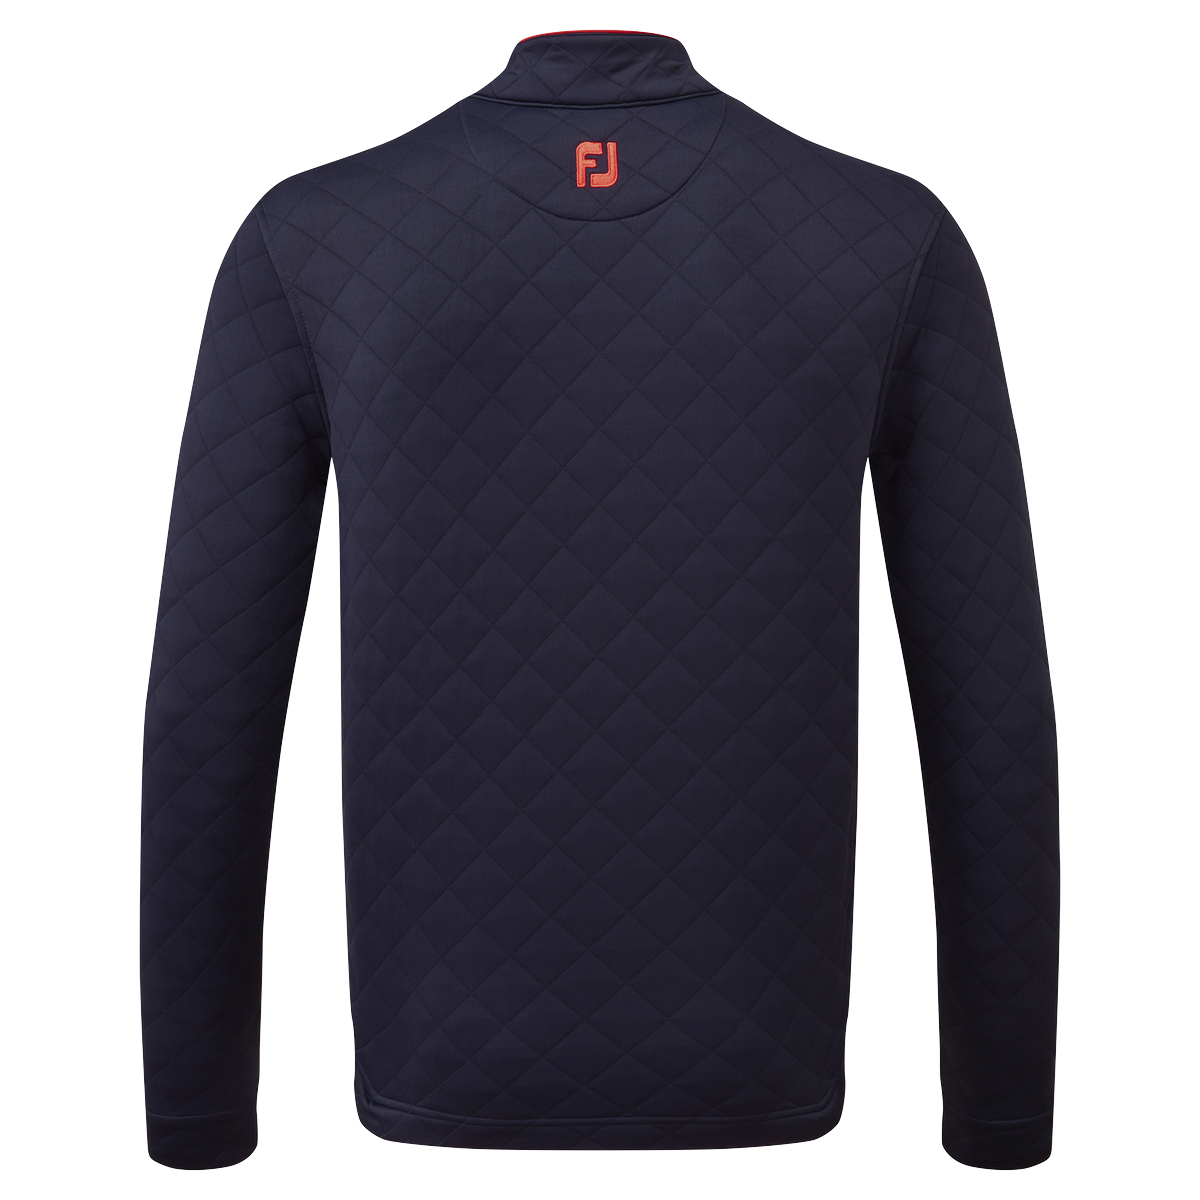 FootJoy Mens Diamond Jacquard Chill-Out Golf Mid-Layer Pullover  - Black/Grey